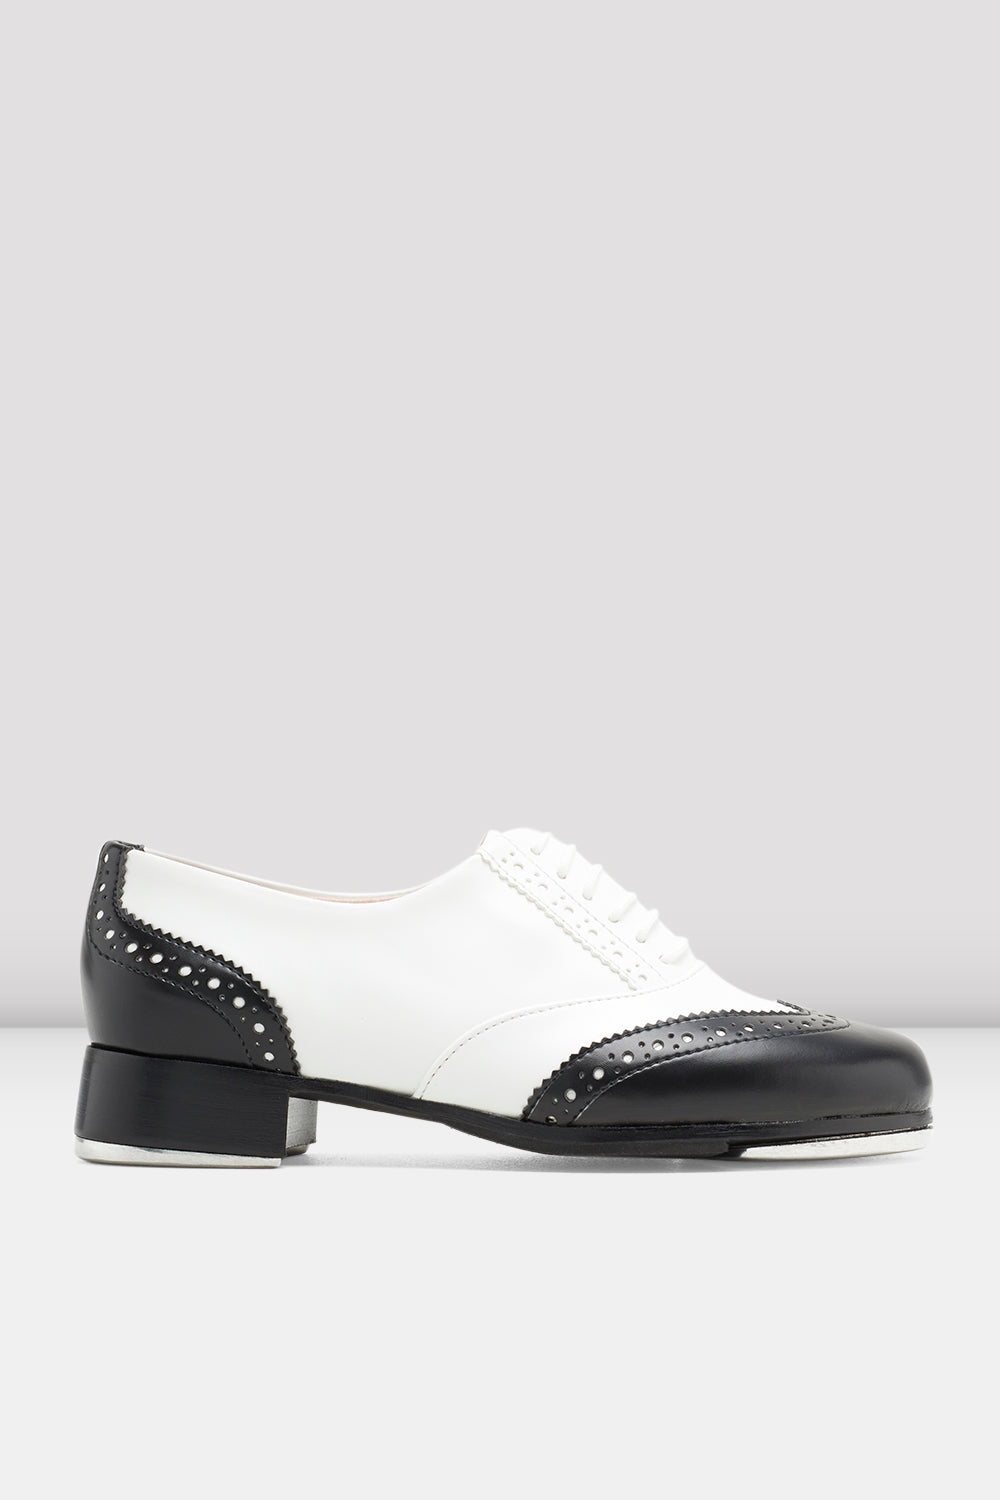 BLOCH Ladies Charleston Tap Shoes, White Black Synthetic Leather